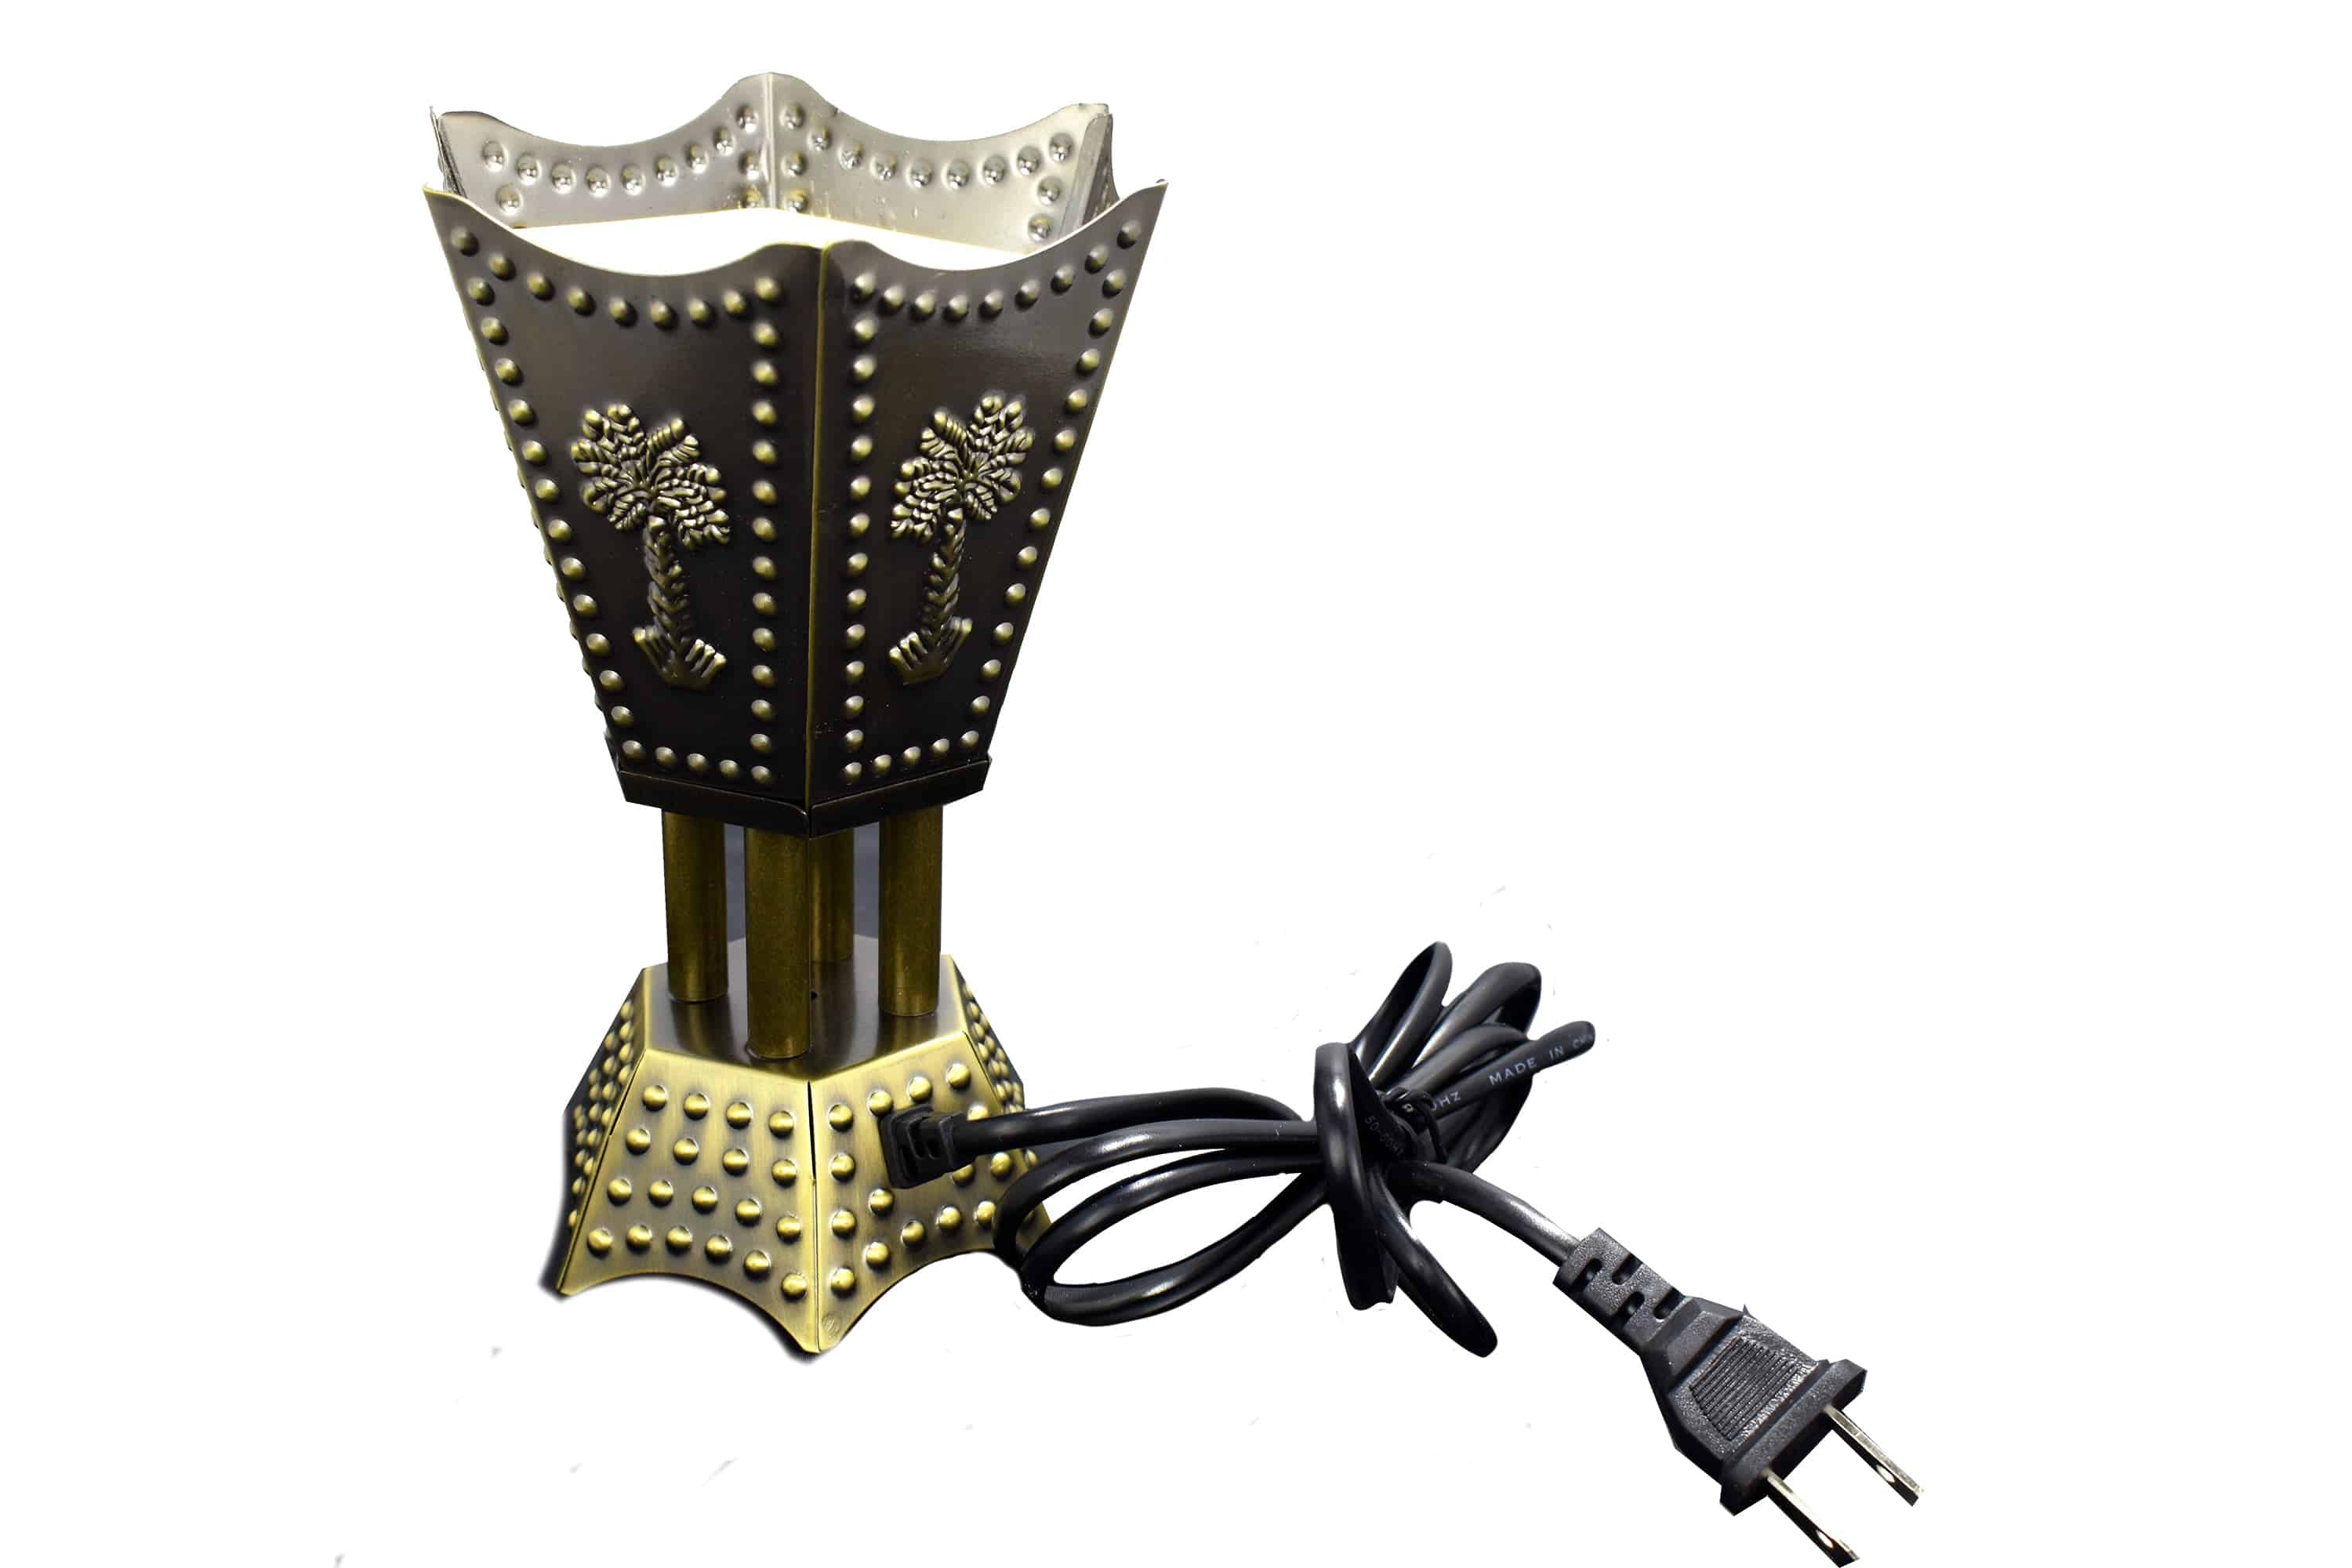 Metalic Studded Hexagon Shaped Electric Incense Bakhoor Burner by Intense Oud - Intense oud